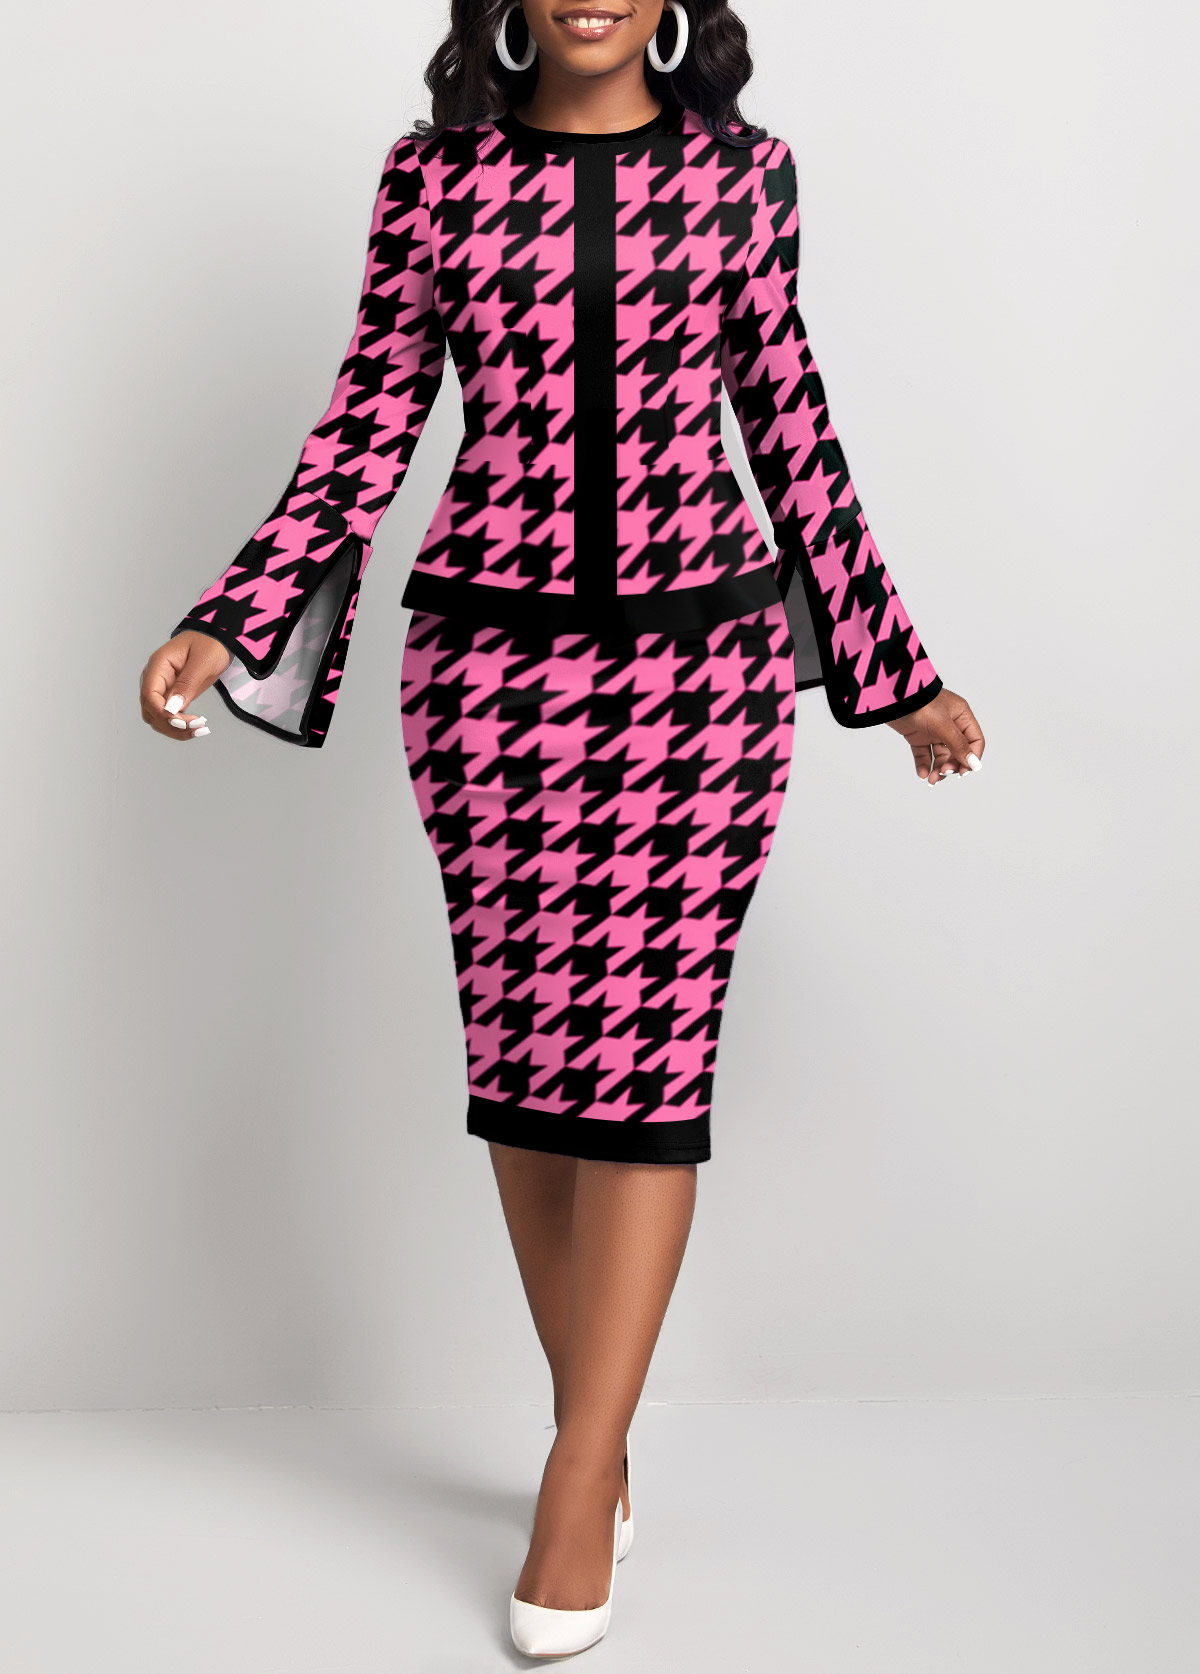 Houndstooth Print Two Piece Hot Pink Top and Skirt